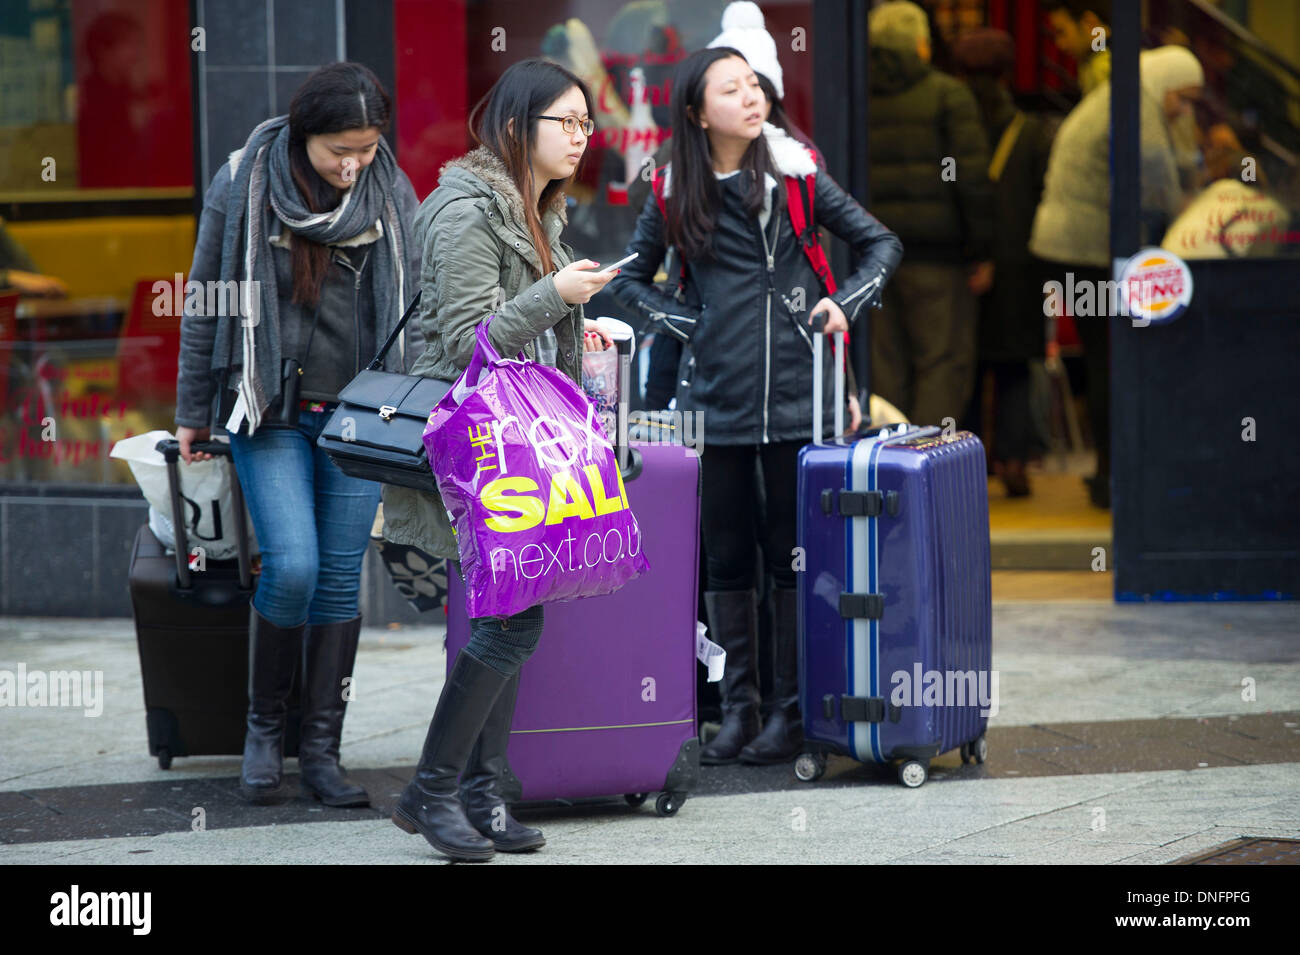 CARDIFF, WALES - December 26: Shoppers out looking for bargains in the Boxing Day sales on December 26, 2013 on Queen Street, Cardiff, Wales.  Credit:  Matthew Horwood/Alamy Live News Stock Photo